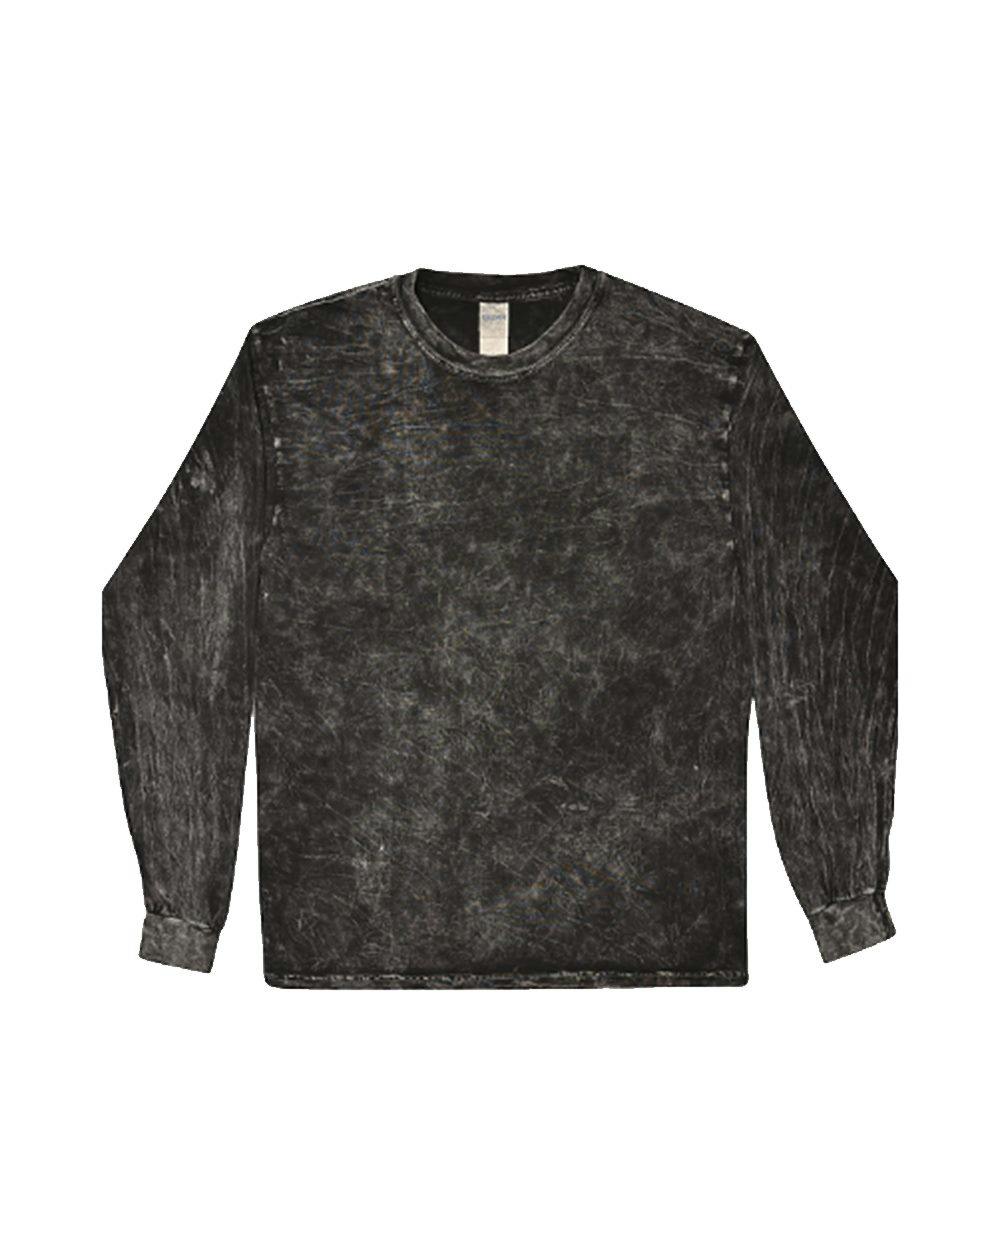 Image for Mineral Wash Long Sleeve T-Shirt - 2300